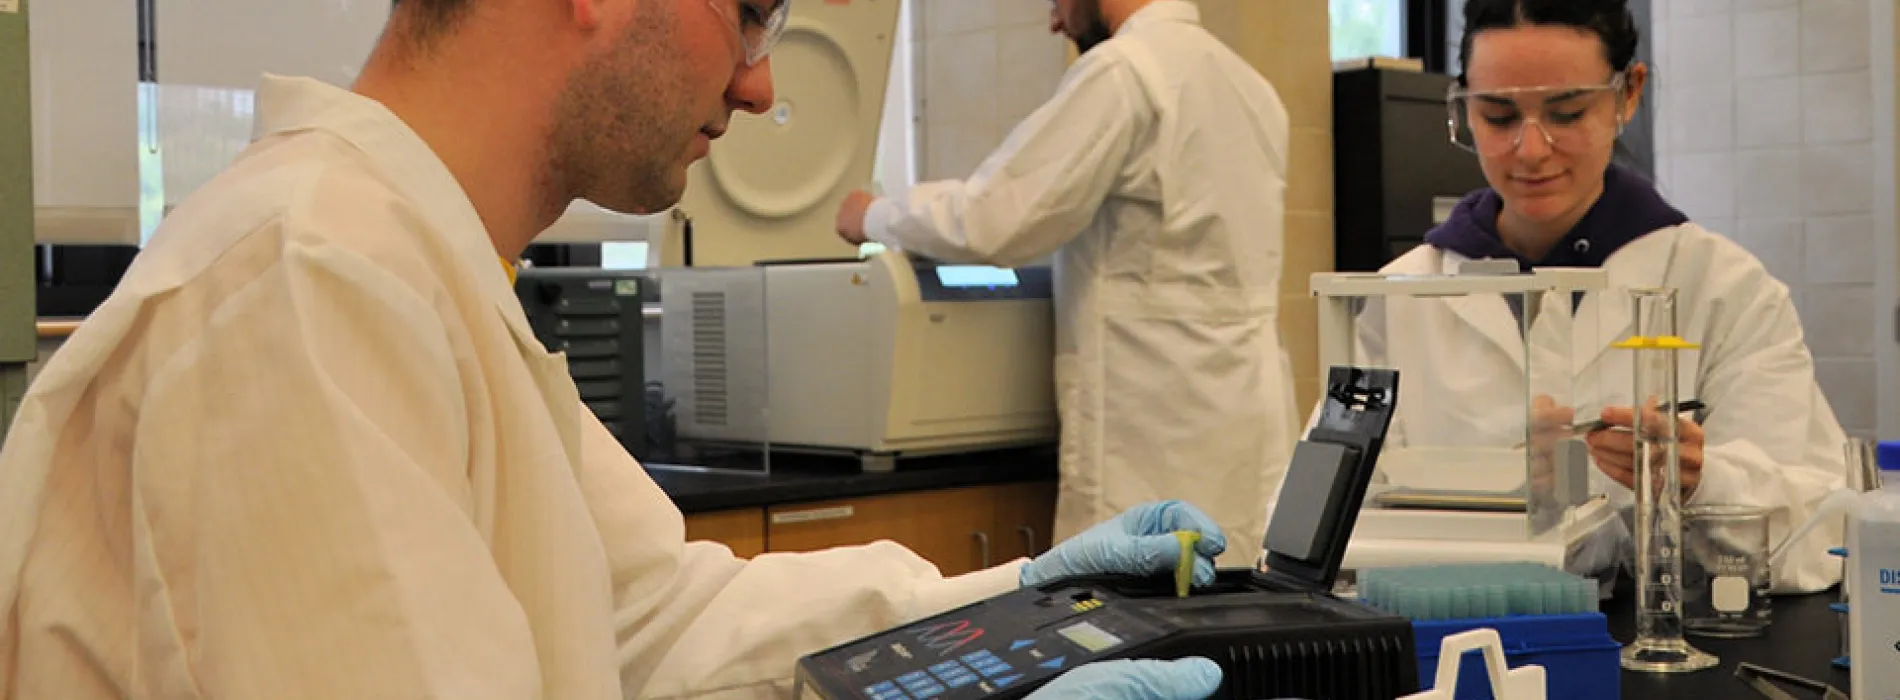 3 students in a lab wearing white coats, blue gloves, using testing equipment